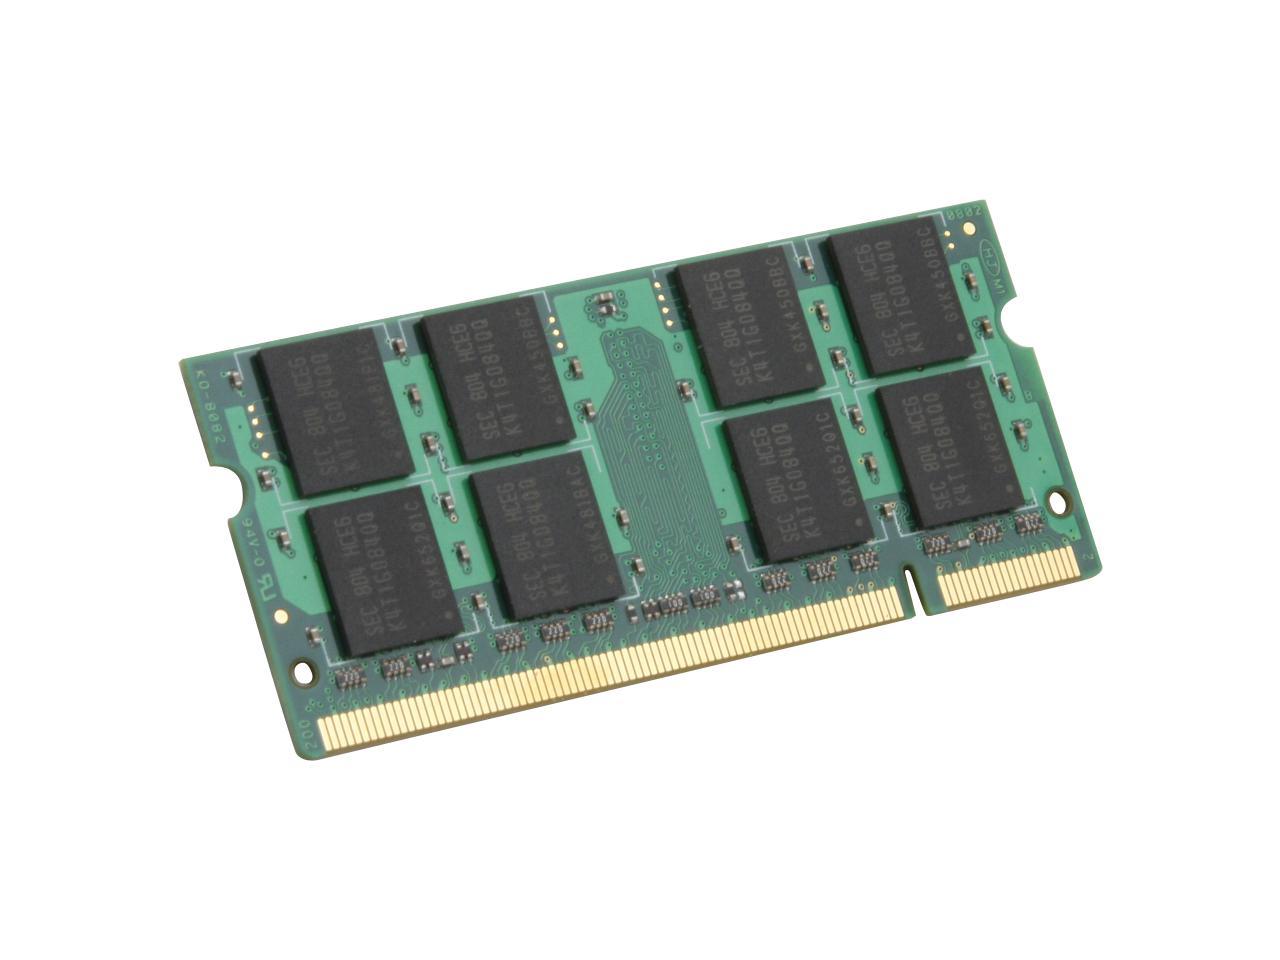 Mushkin 2GB DDR2 667 (PC2 5300) Memory for Apple Notebook Model 971559A